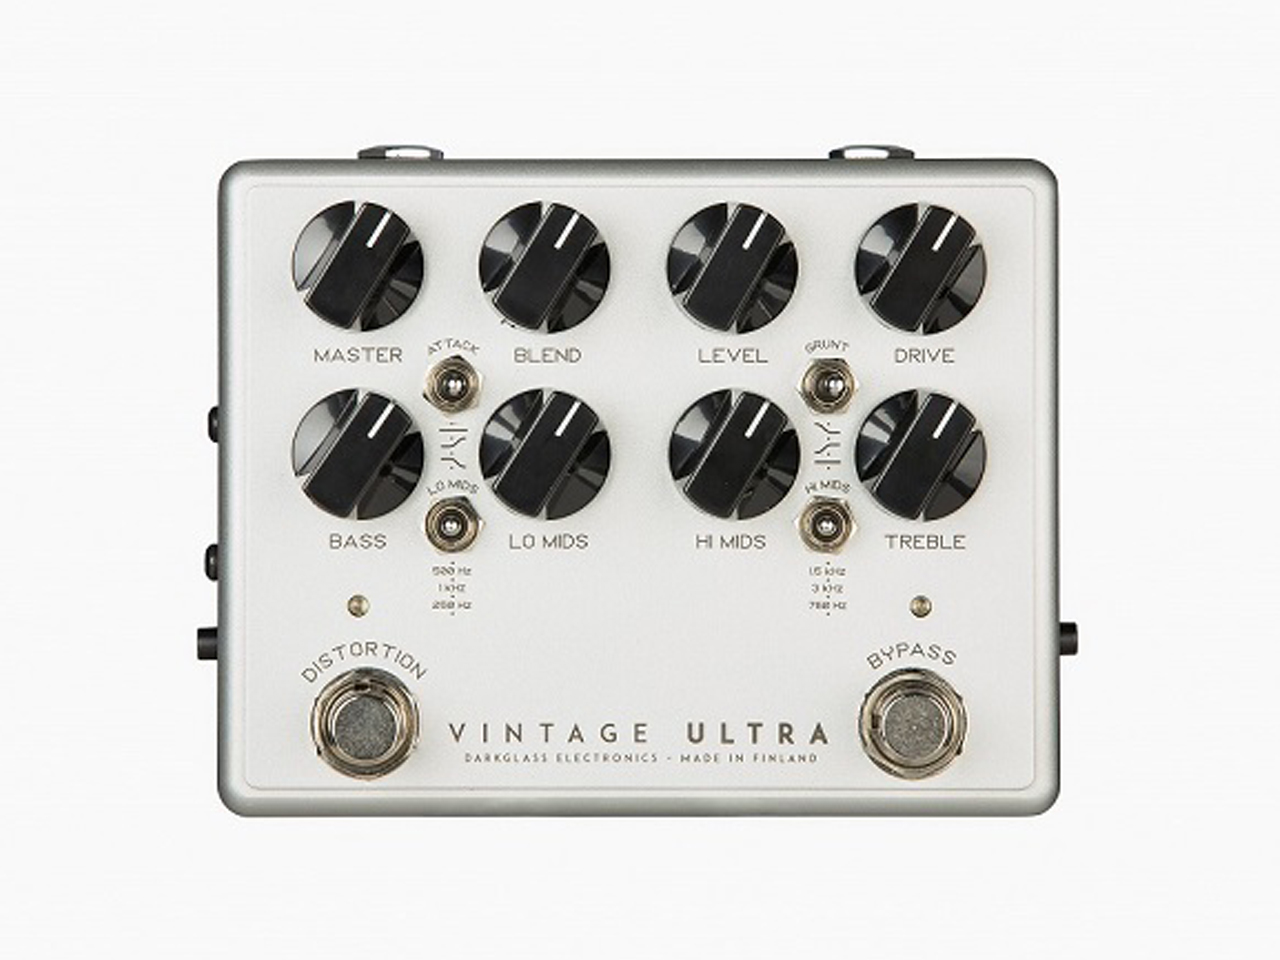 Darkglass Electronics(ダークグラスエレクトロニクス) Vintage Ultra V2 with Aux In (オーバードライブ/プリアンプ) 駅前店